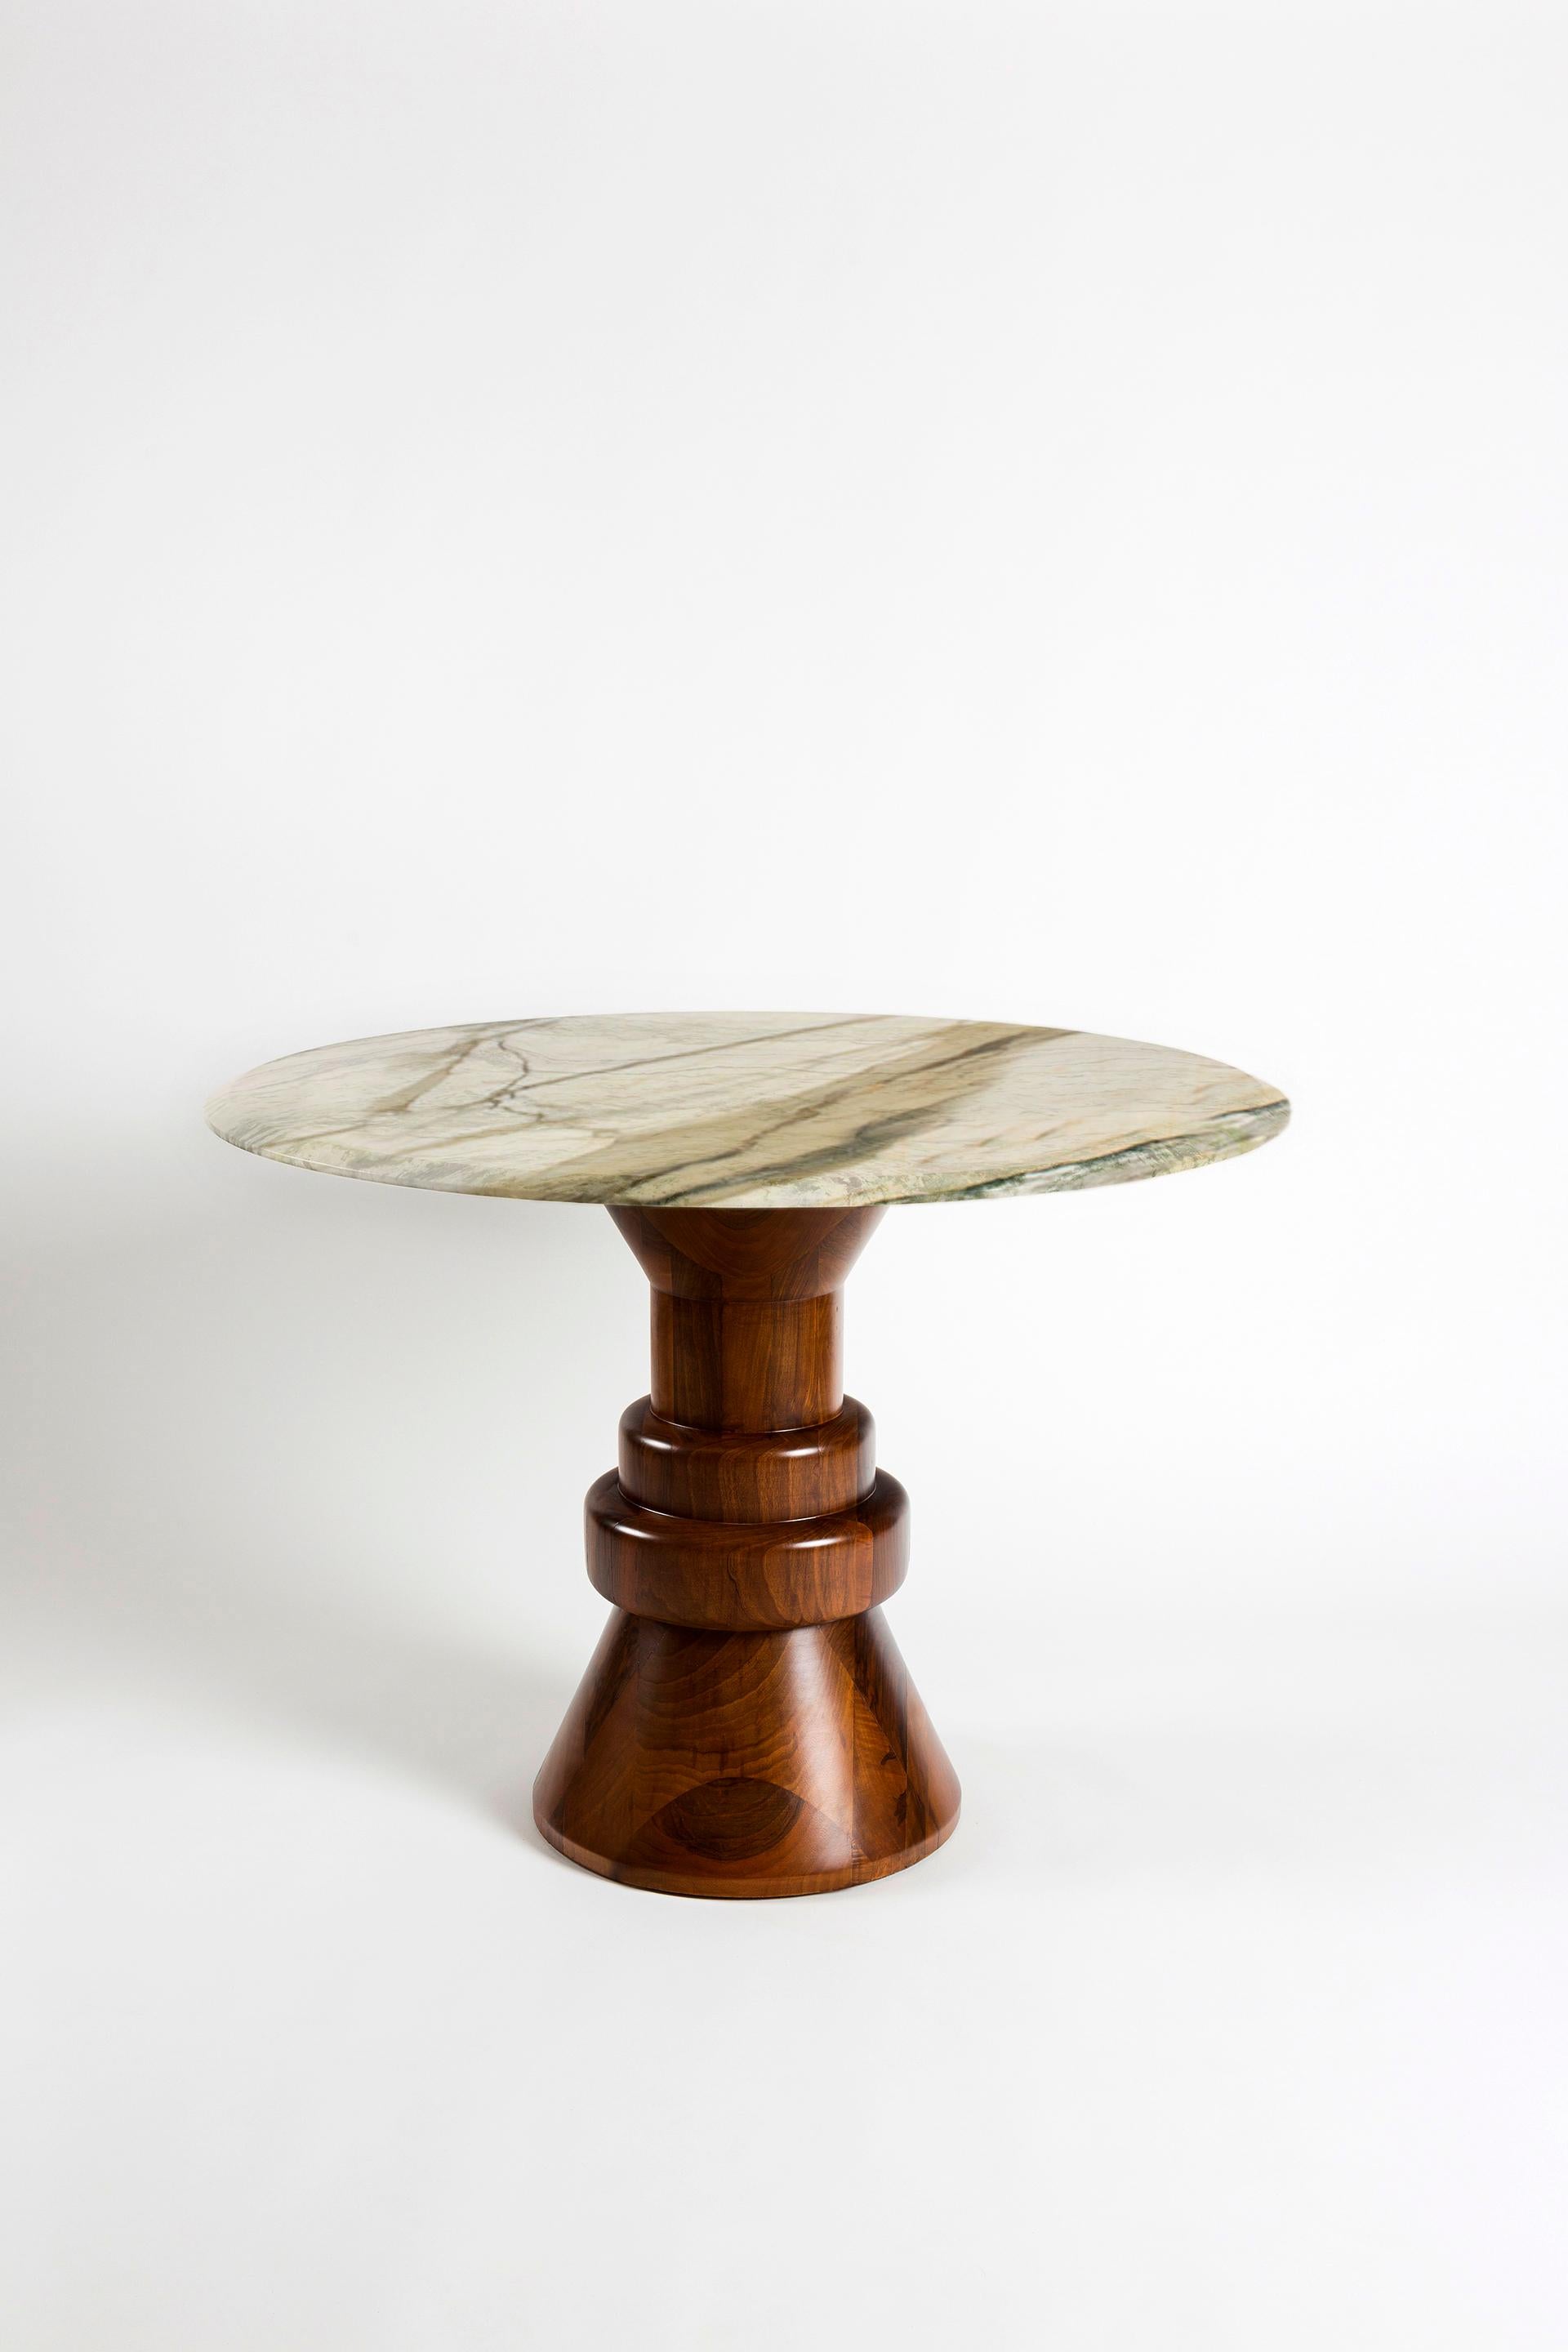 21st Century Green Marble Round Dining Table with Sculptural Wooden Base In New Condition For Sale In New York, NY